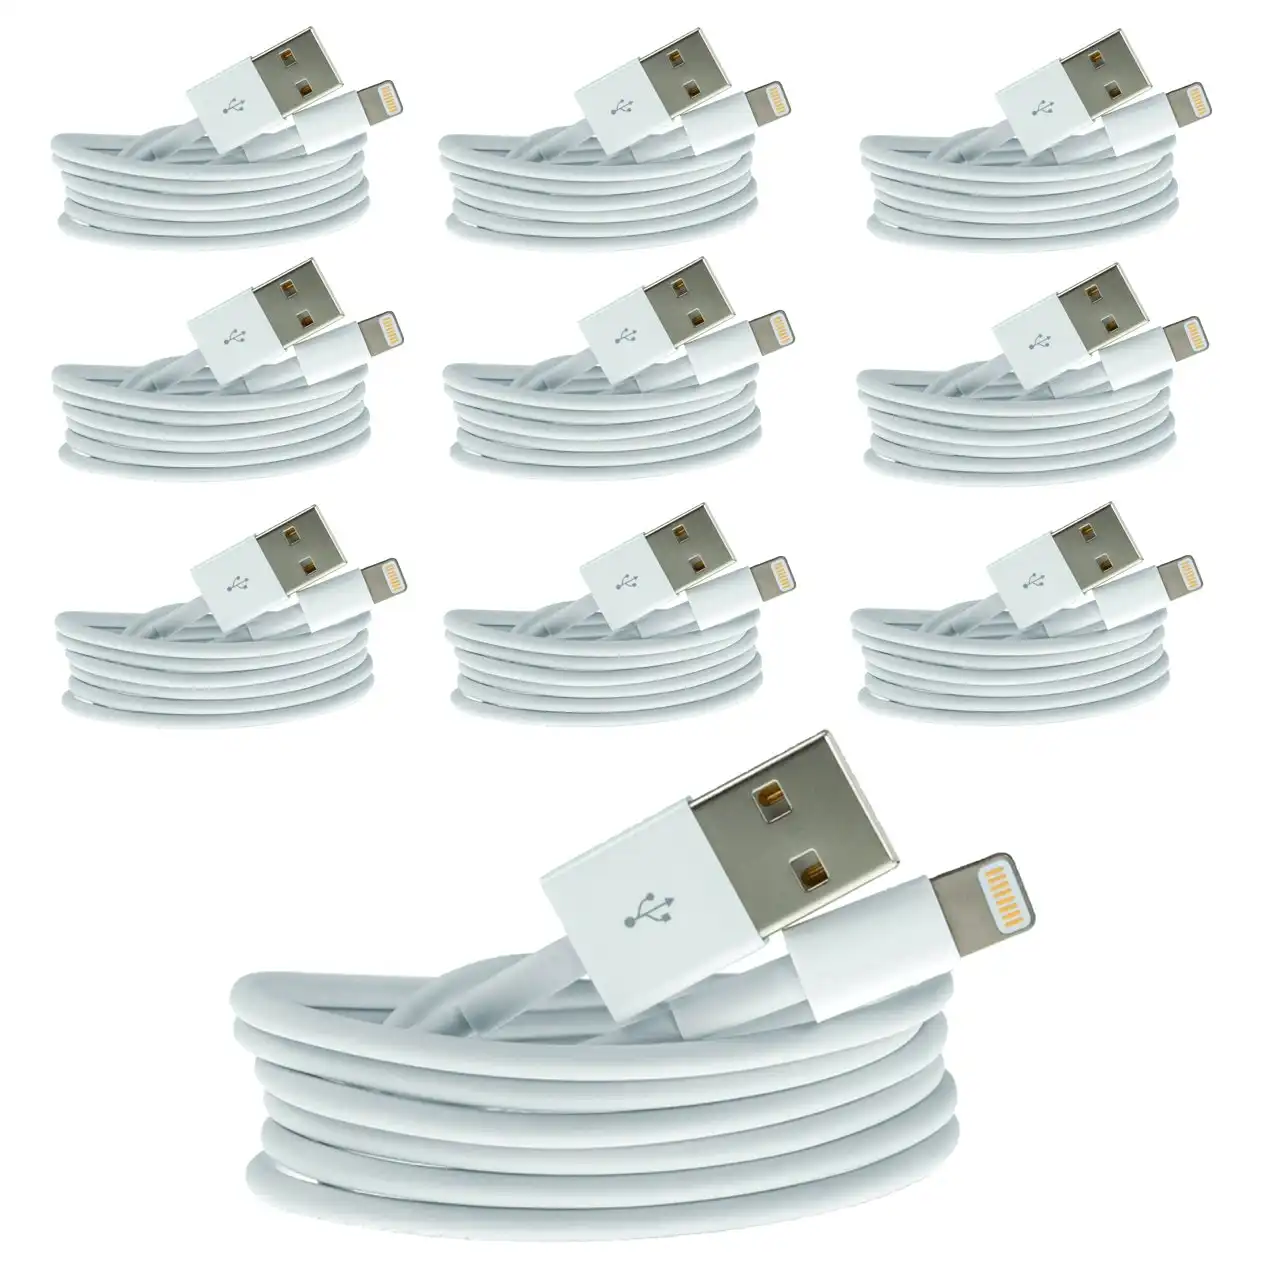 10 Pc 1M Usb Data Charge Cable Lightning Pin Connector For Apple Iphone Ipad 10X